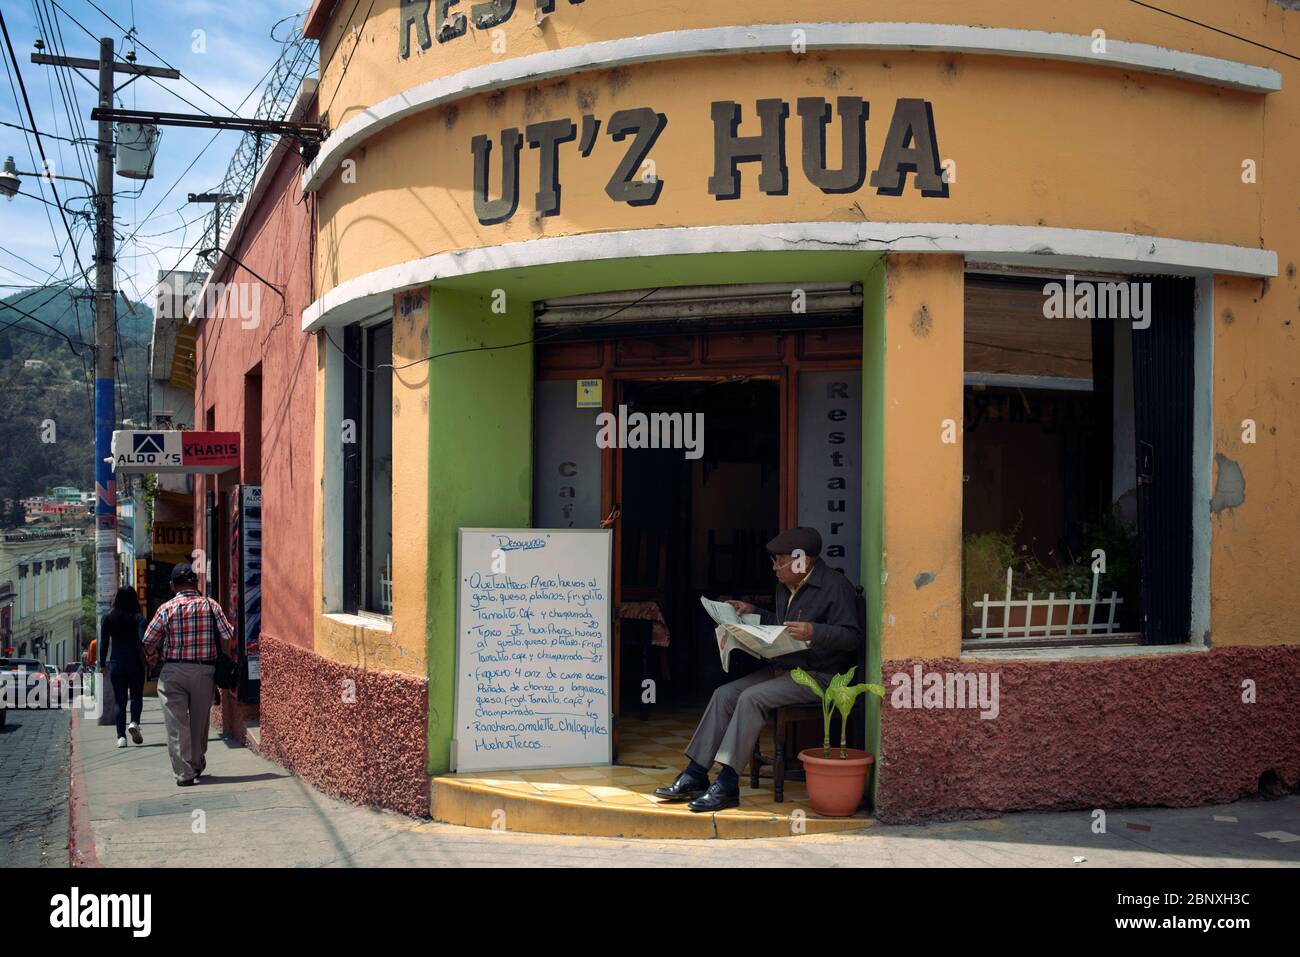 Latino man with newspaper outside Ut'z Hua local restaurant. Mayan eatery offering homemade meals, daily specials. Quetzaltenango, Guatemala. Mar 2019 Stock Photo